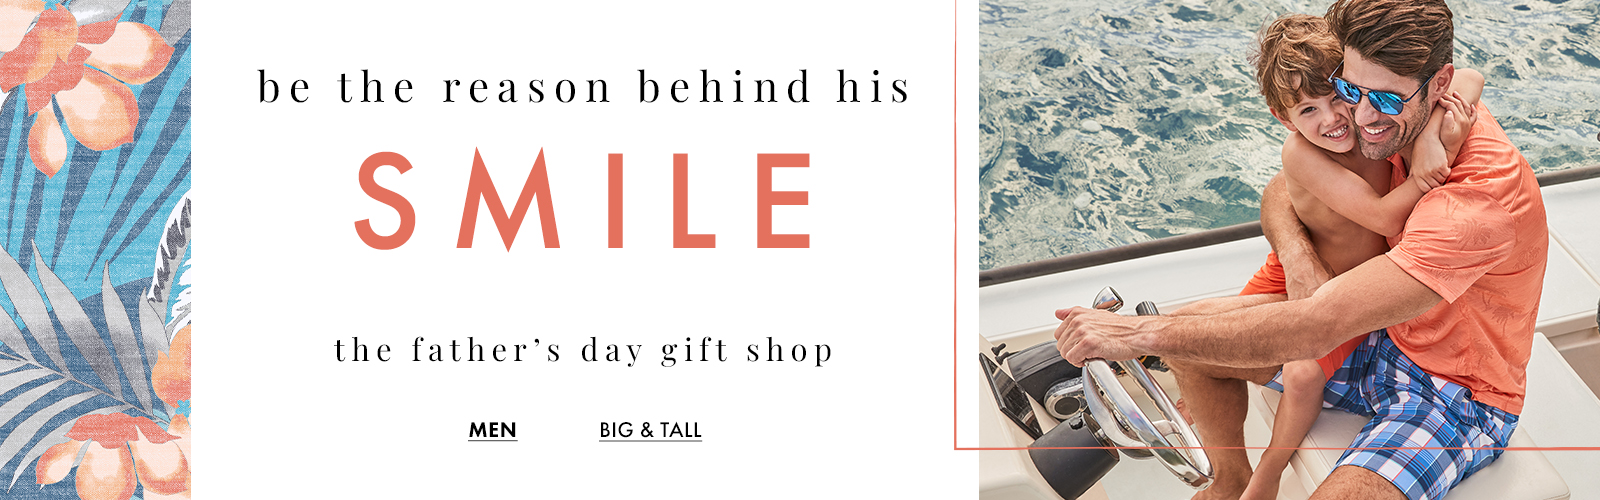 Be The Reason Behind His Smile - Father's Day Gift Shop Men